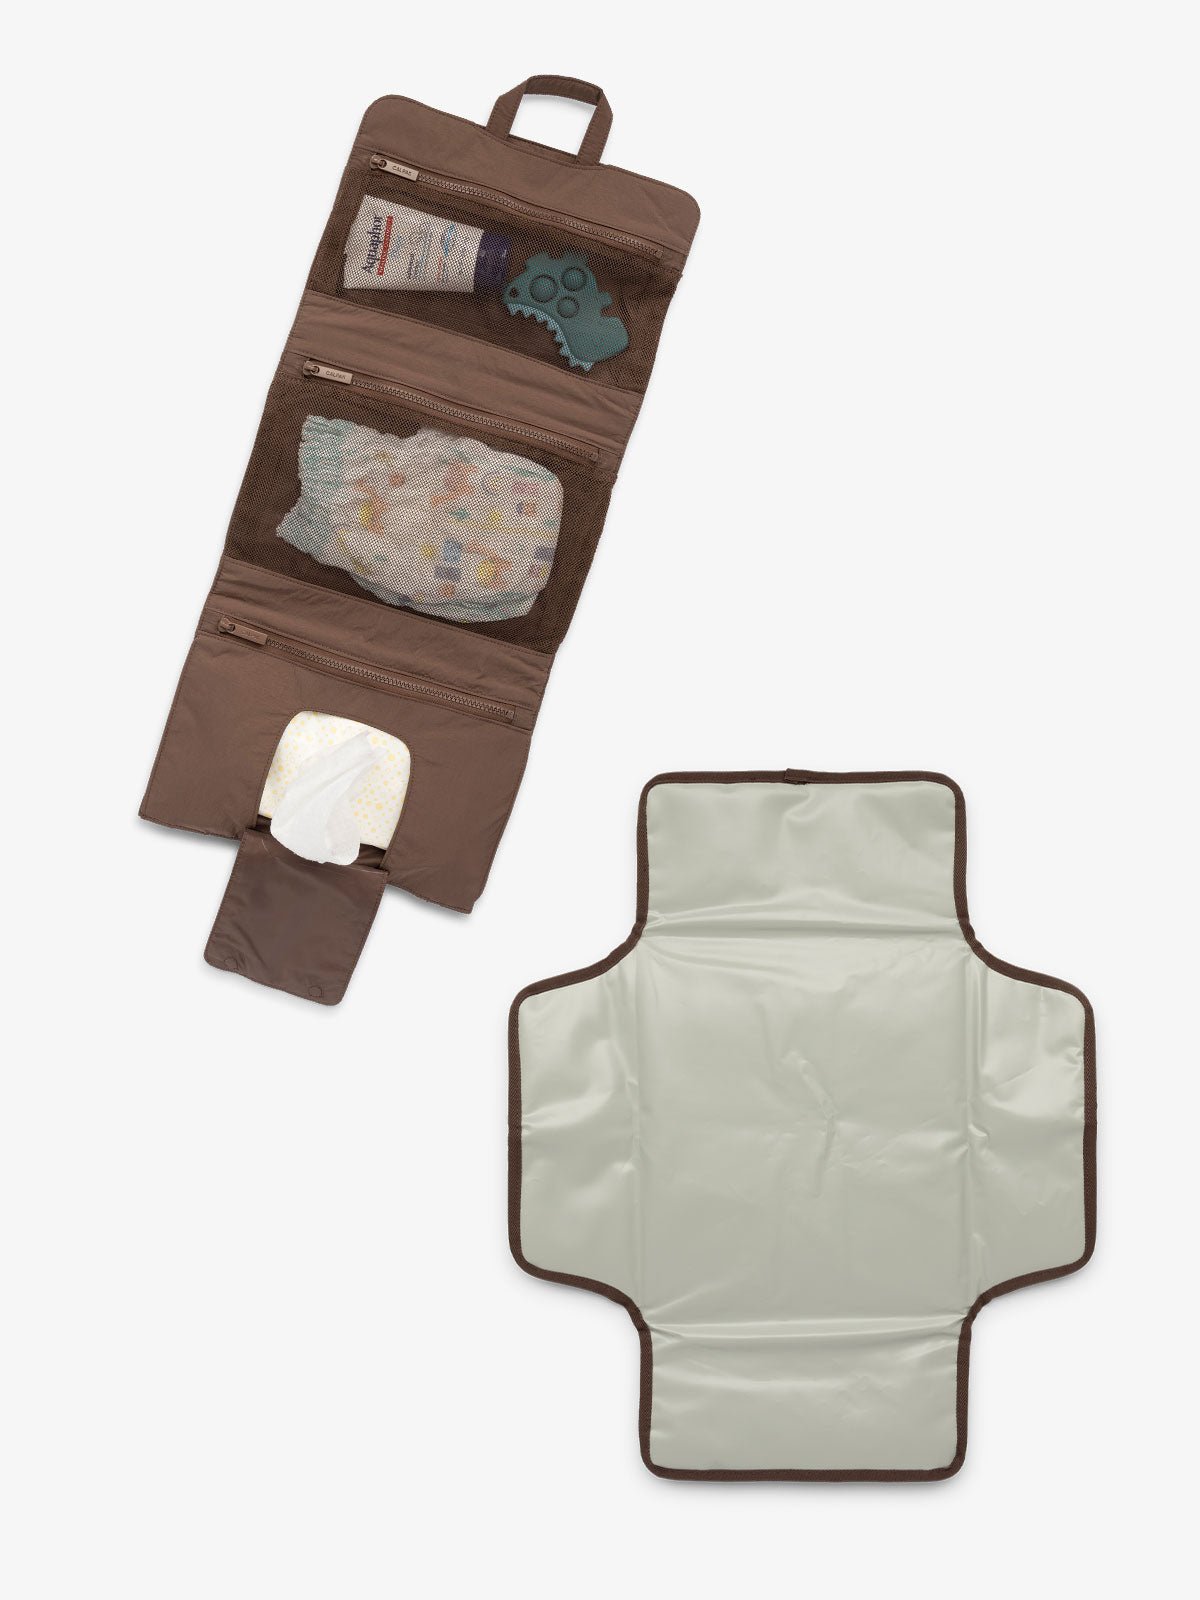 CALPAK portable changing pad includes multiple pockets, collapsing hanging hook, and detachable changing pad in brown